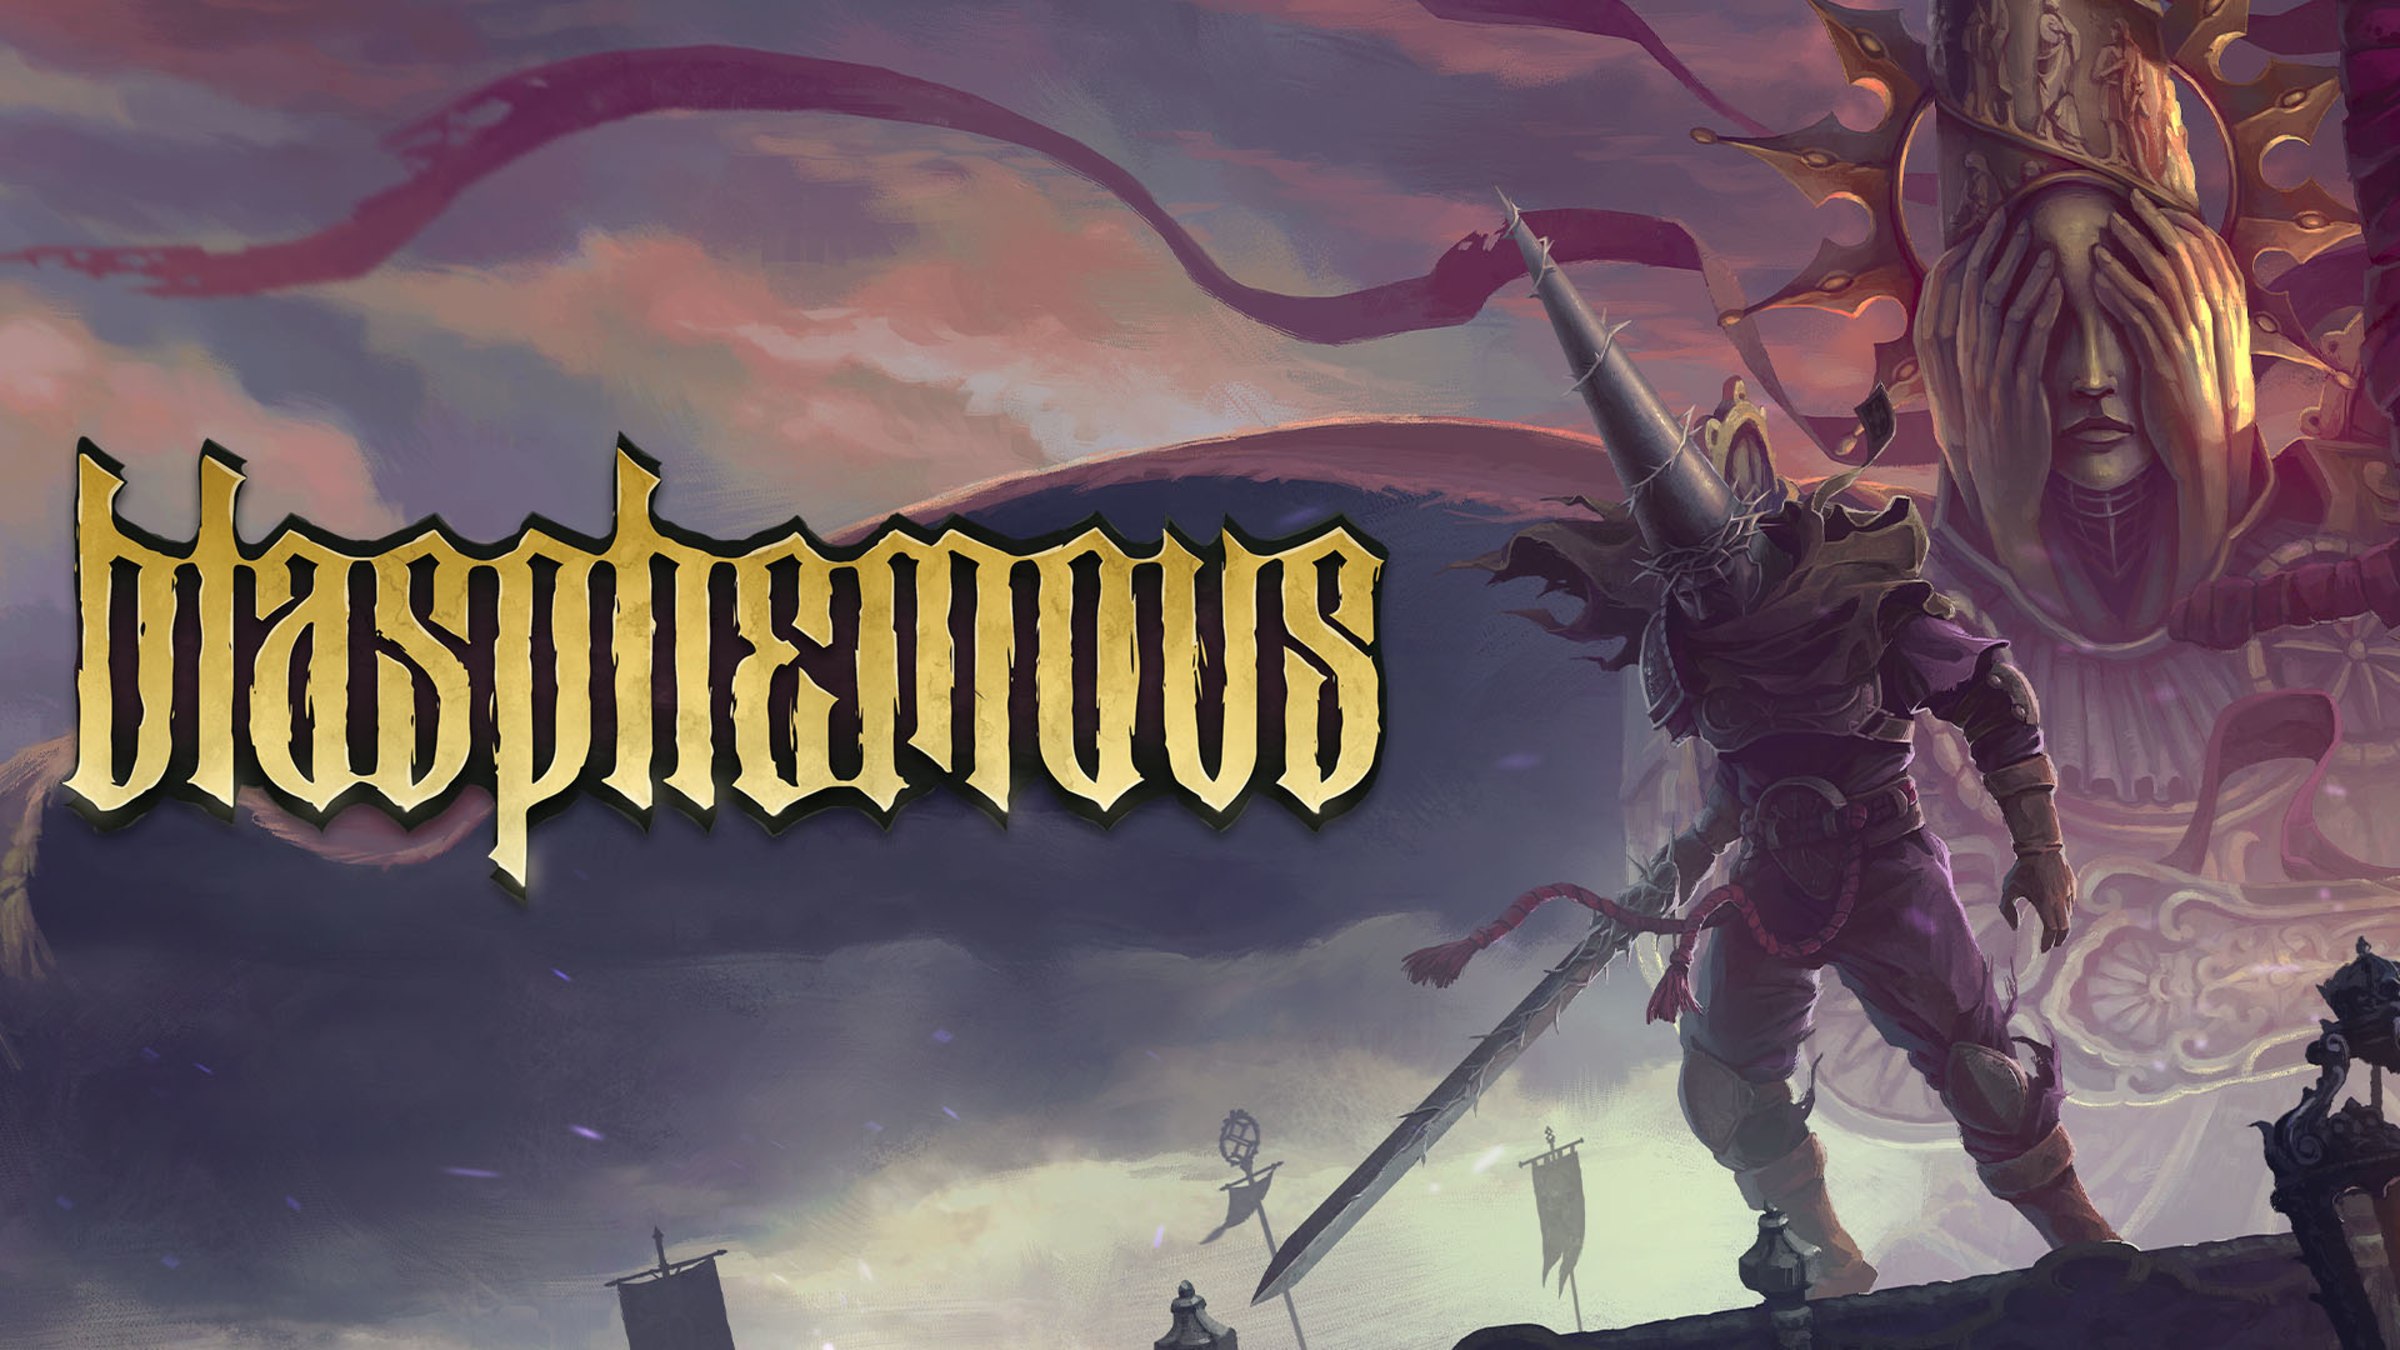 Blasphemous Deluxe Edition: Action-Packed Nintendo Switch Game with 16+  Rating